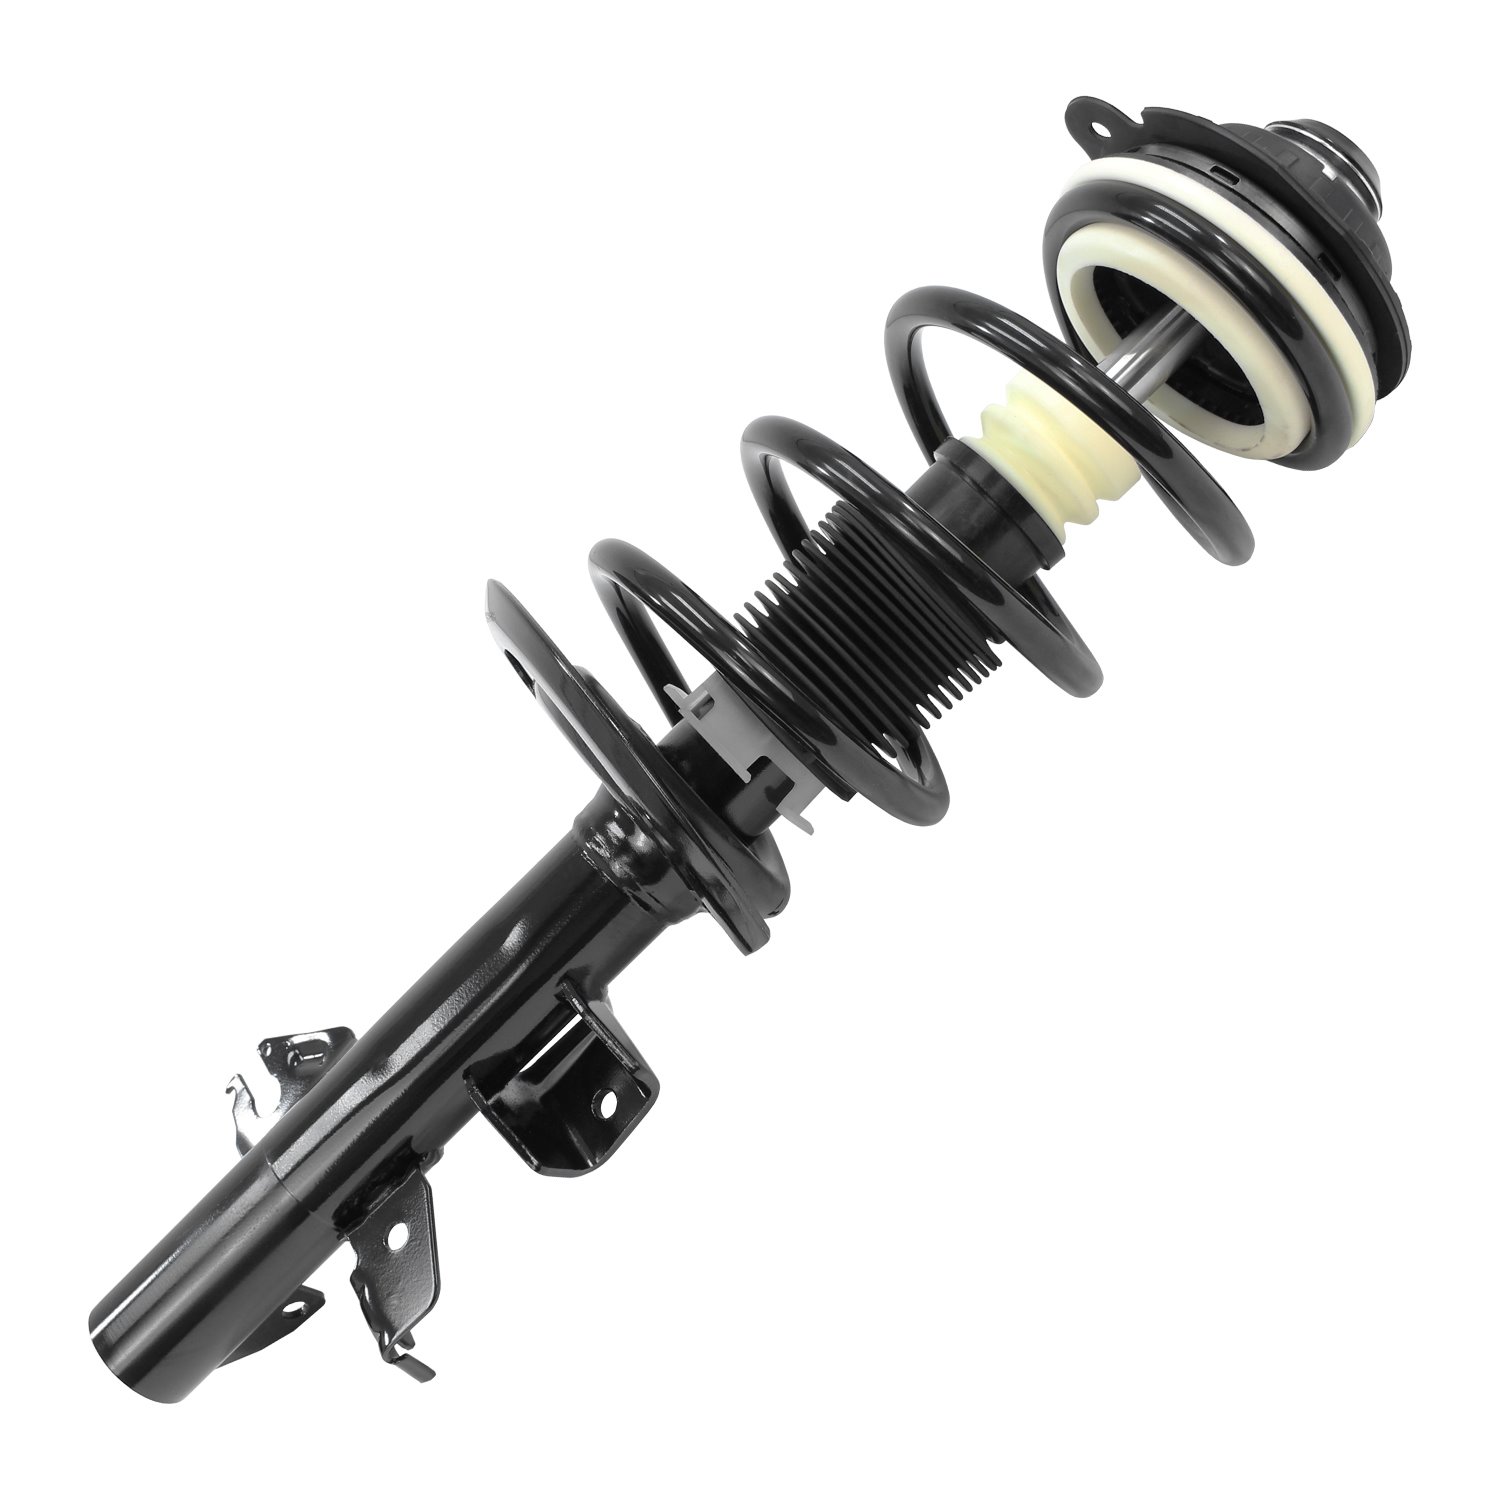 13611 Front Suspension Strut & Coil Spring Assemby Fits Select Jeep Cherokee